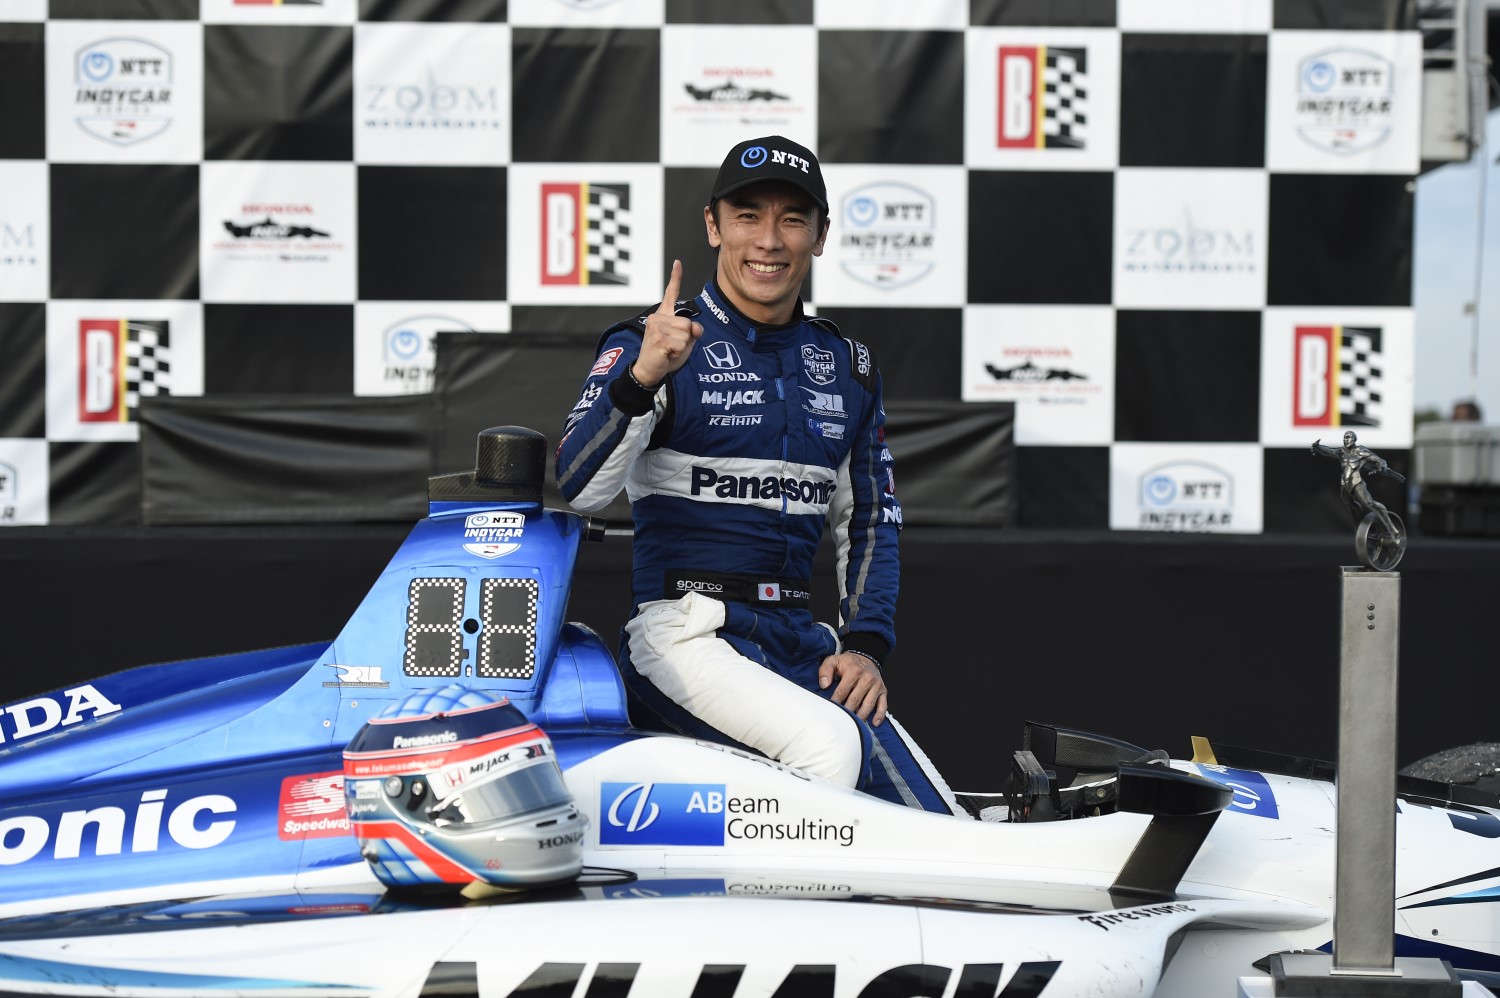 Sato won from pole at Barber this year